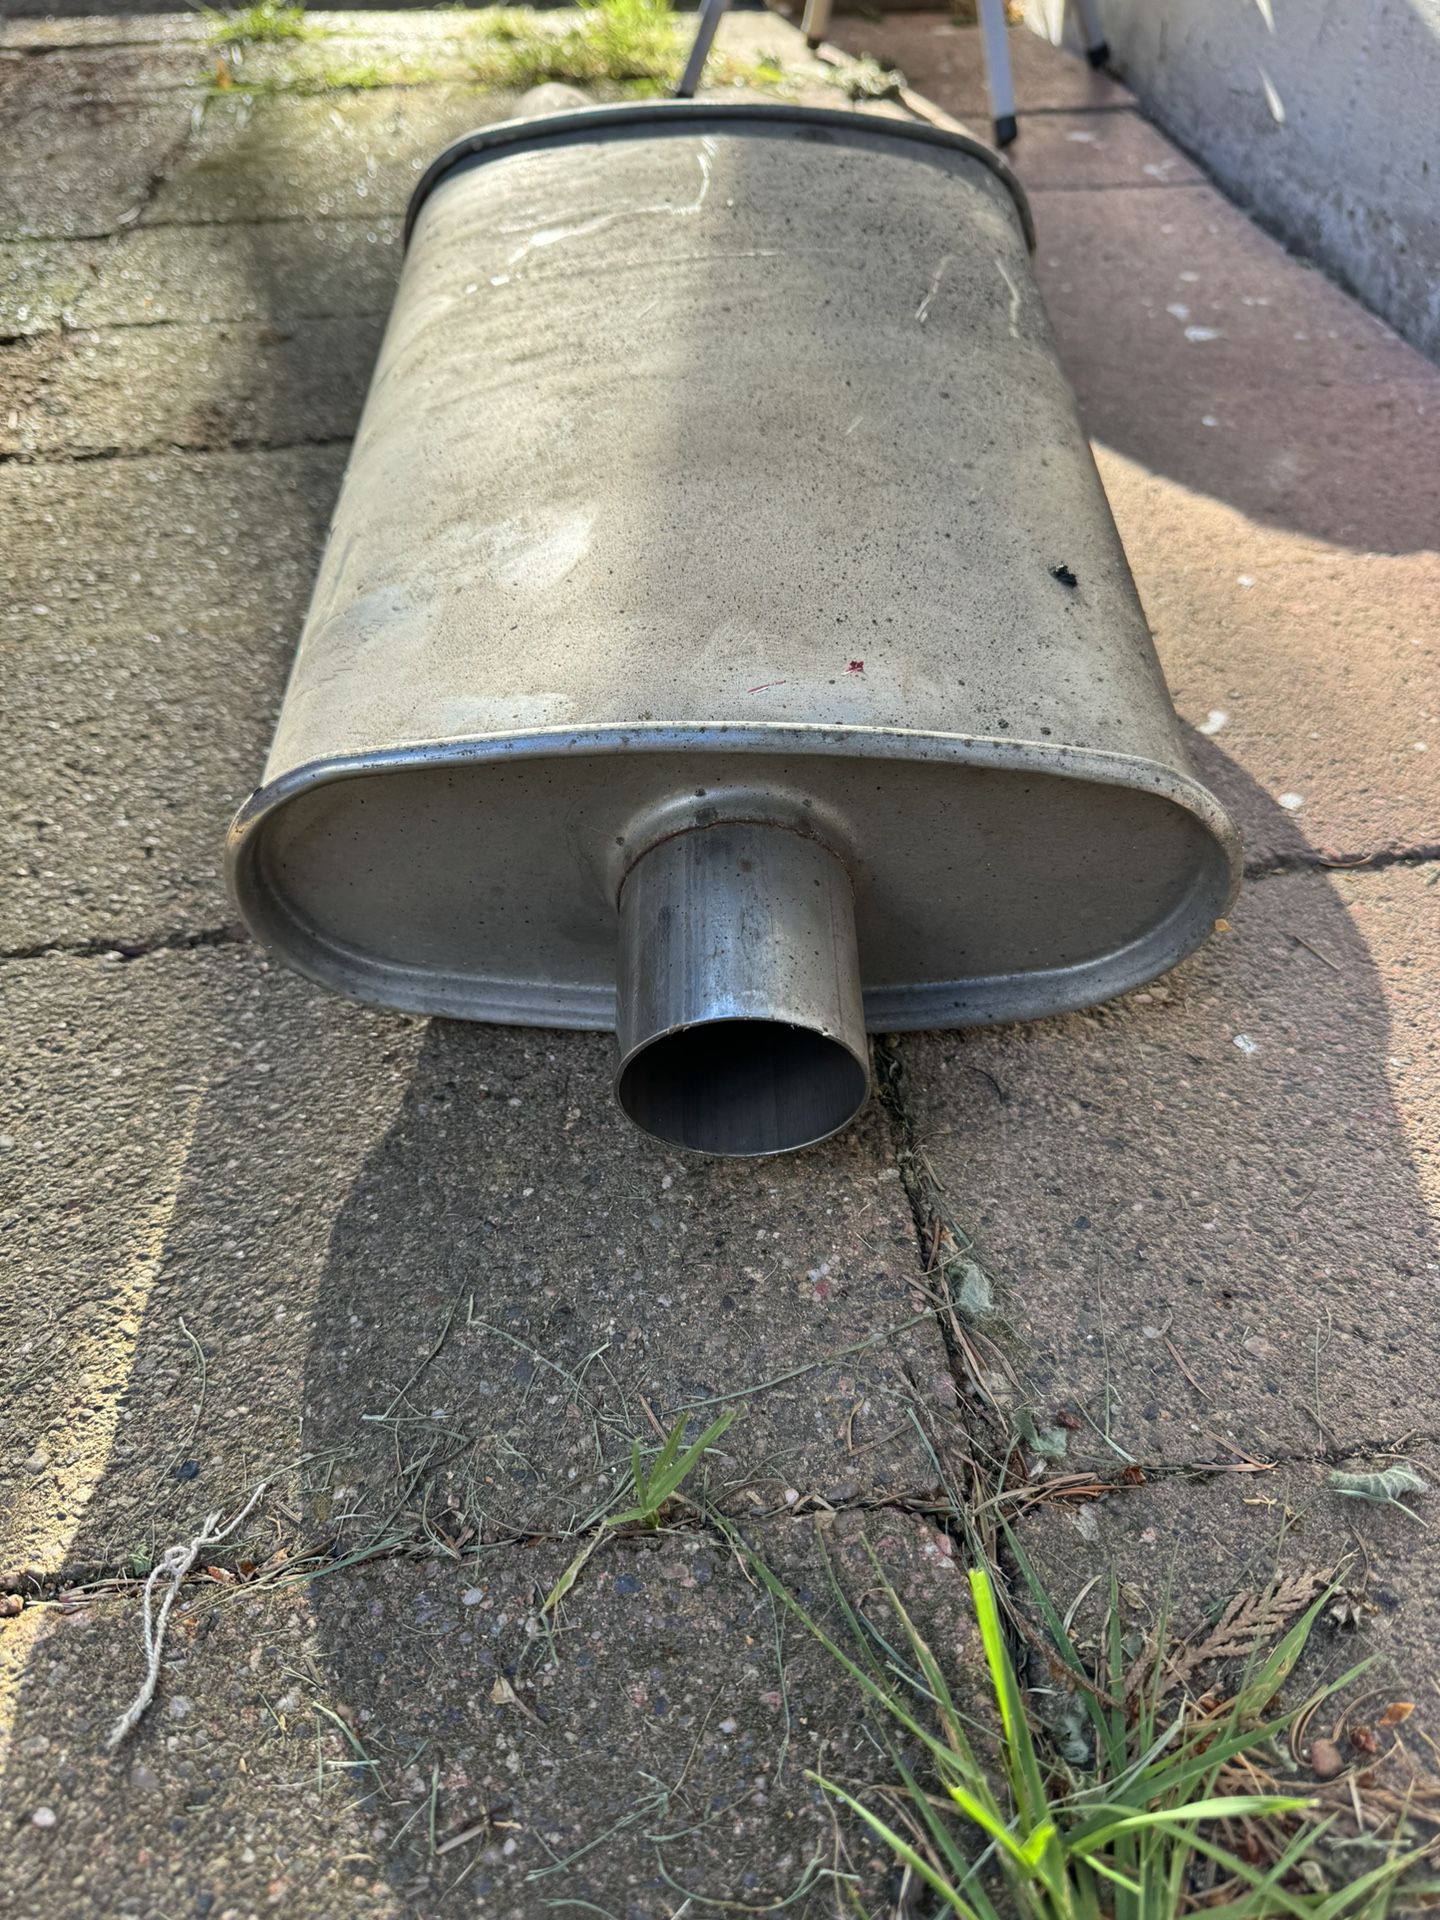 92/95 Honda civic exhaust tip Only 